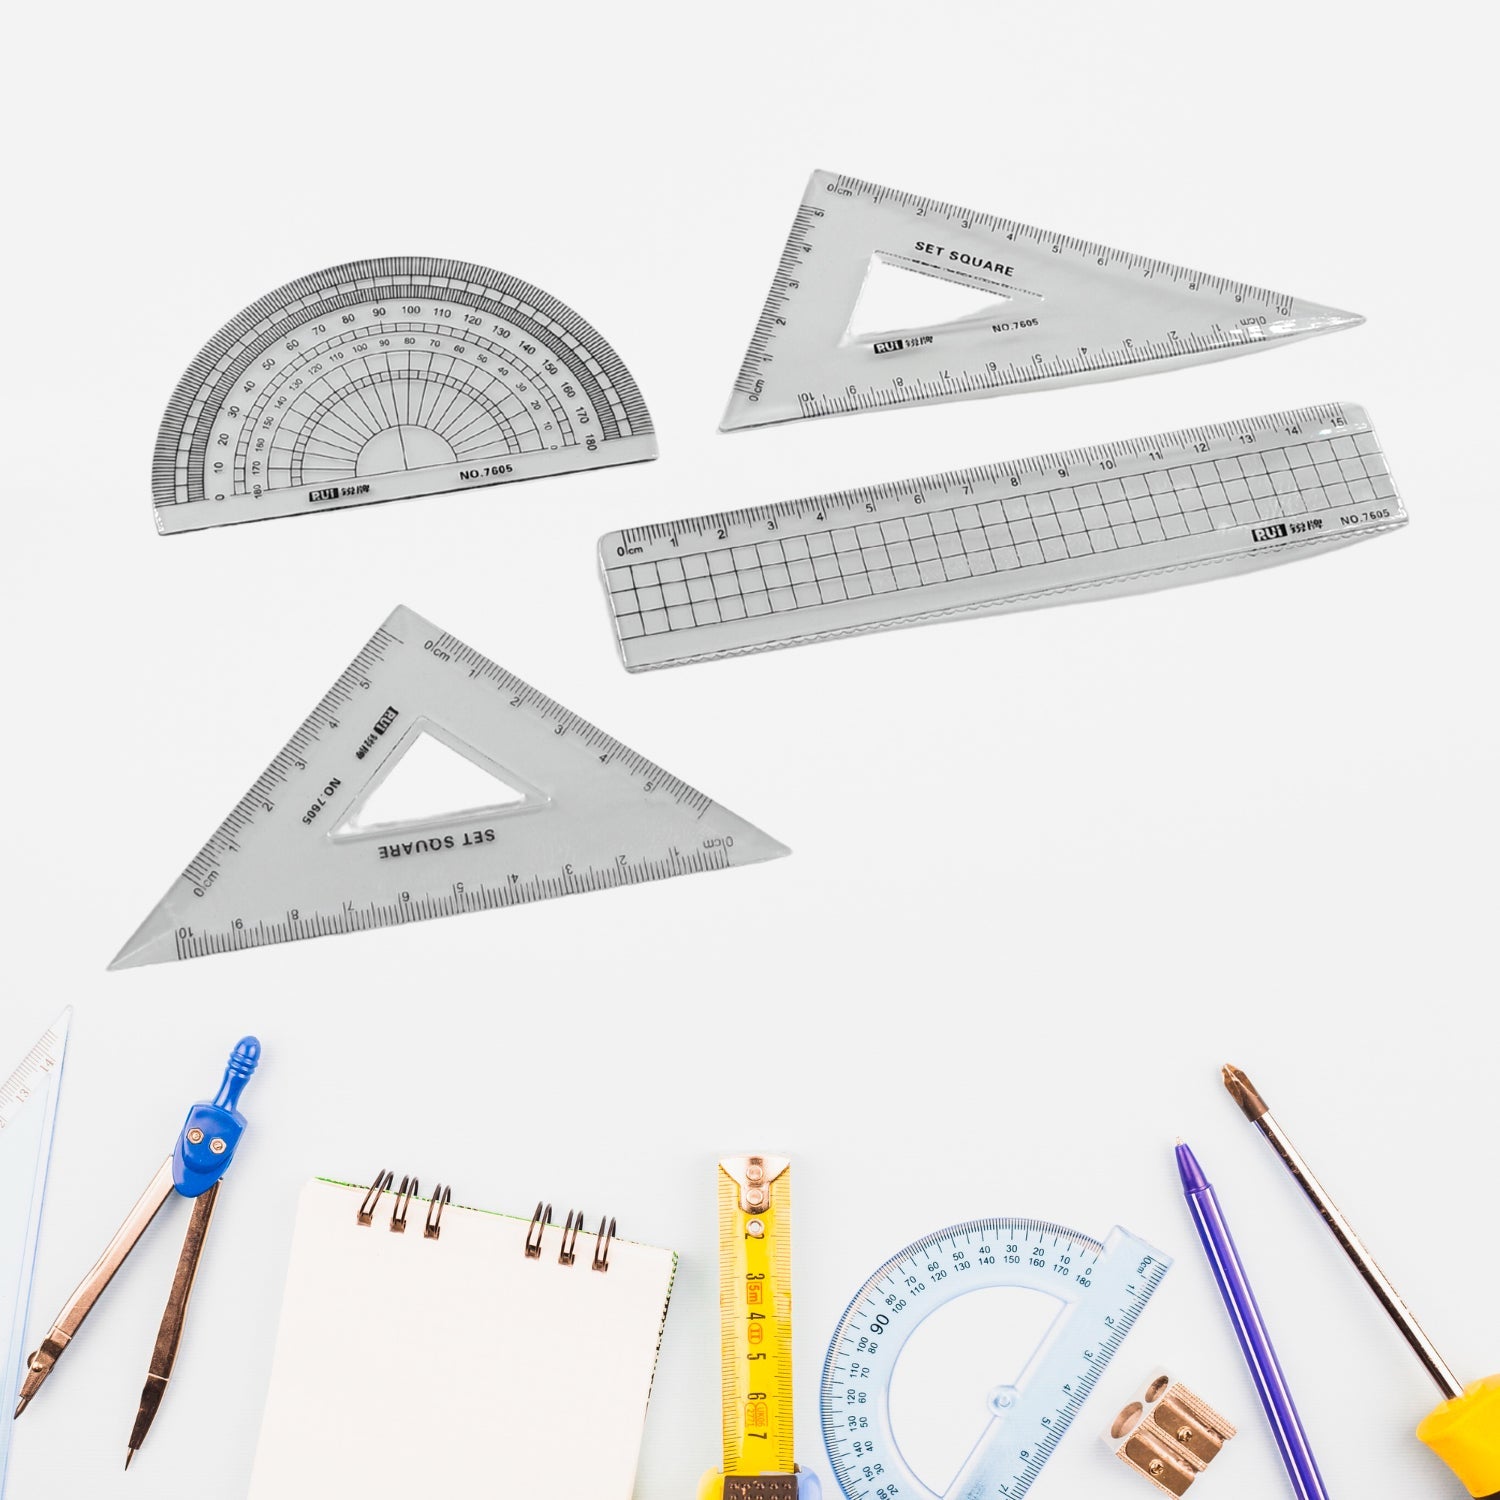 7915 Math Geometry Tool Plastic Clear Ruler Sets, Protractor, Triangle Math Architectural Tools 4 Pieces DeoDap